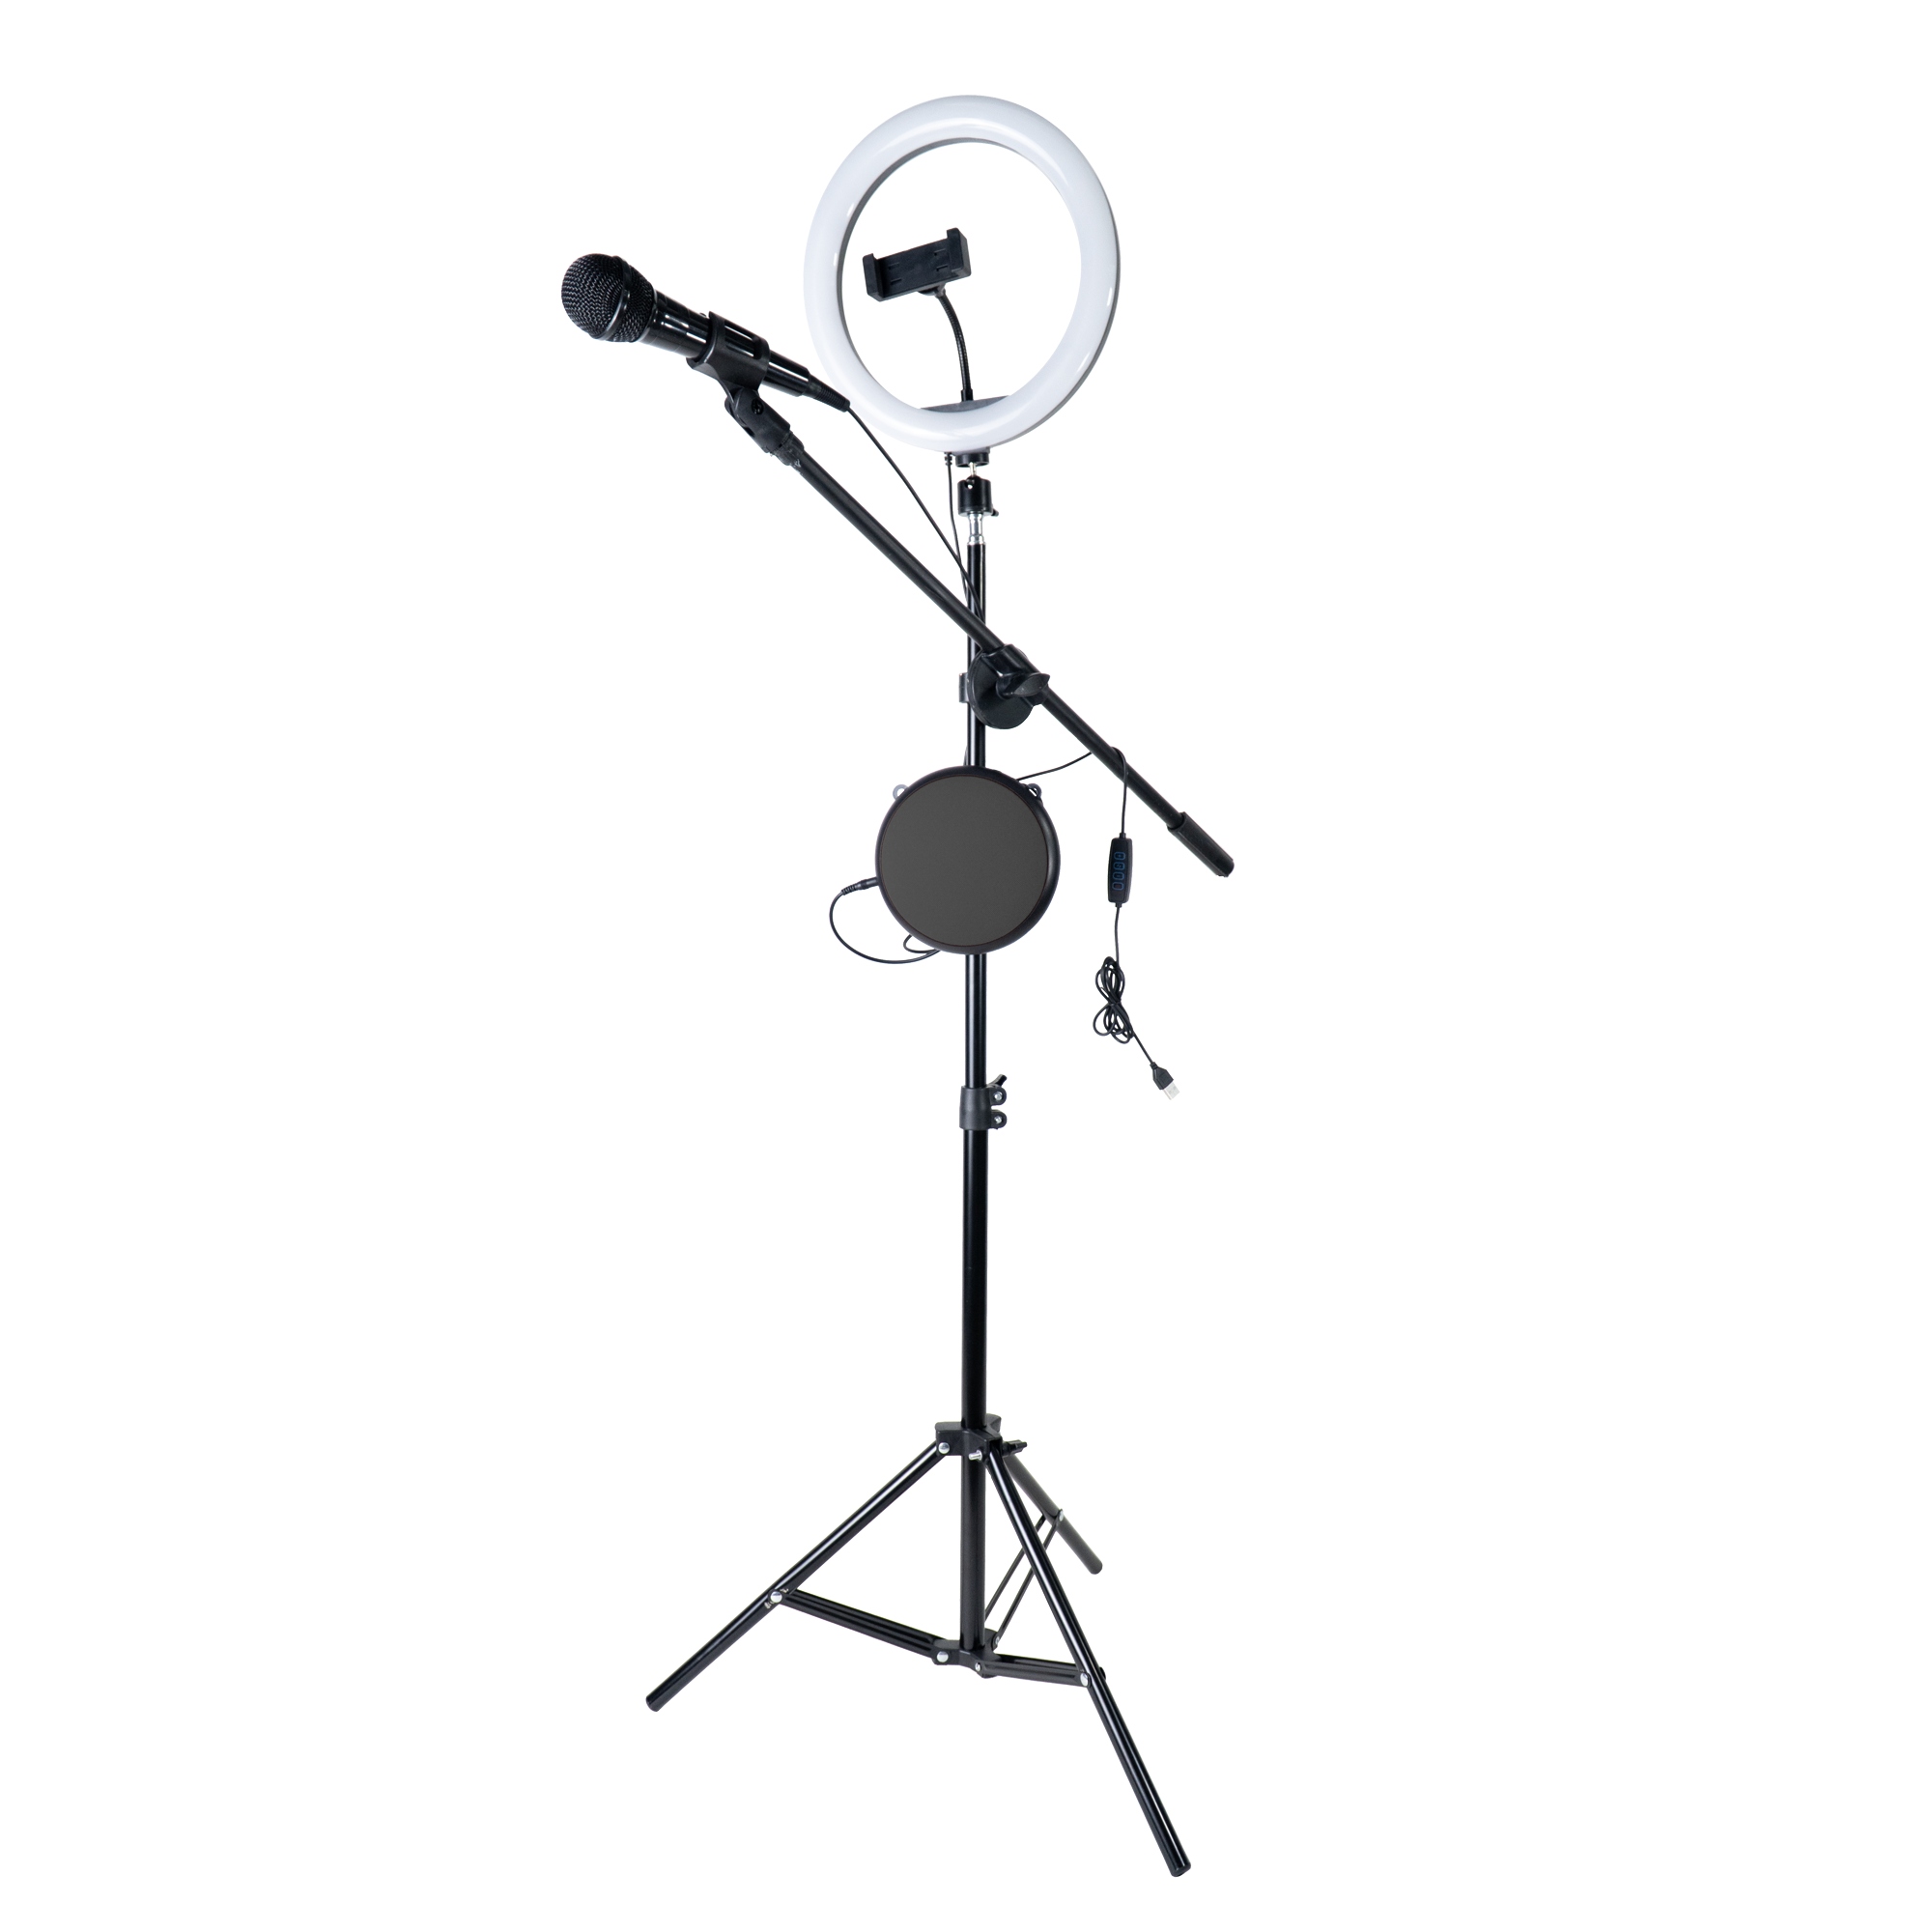 Stage microphone and ring light - SUPERSTAR